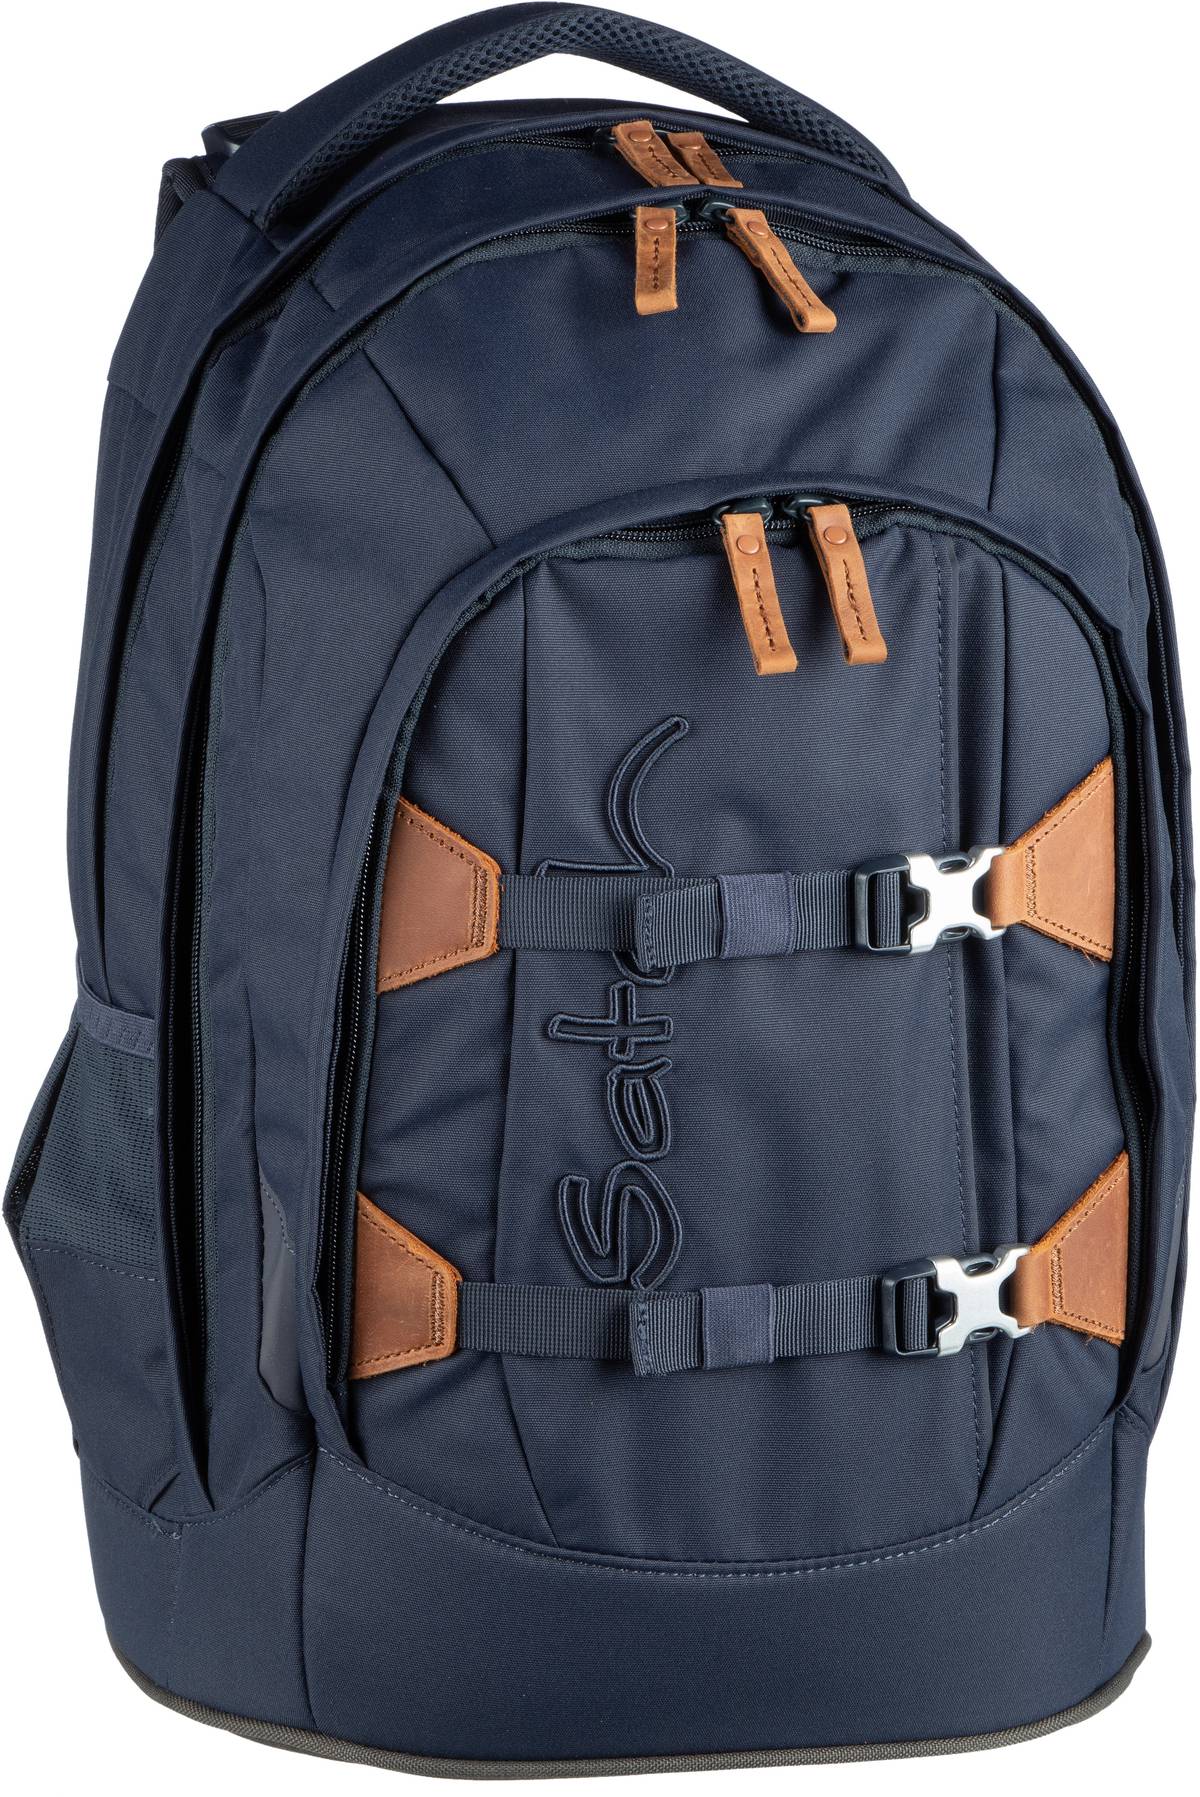 satch satch pack Nordic Edition - Nordic Blue